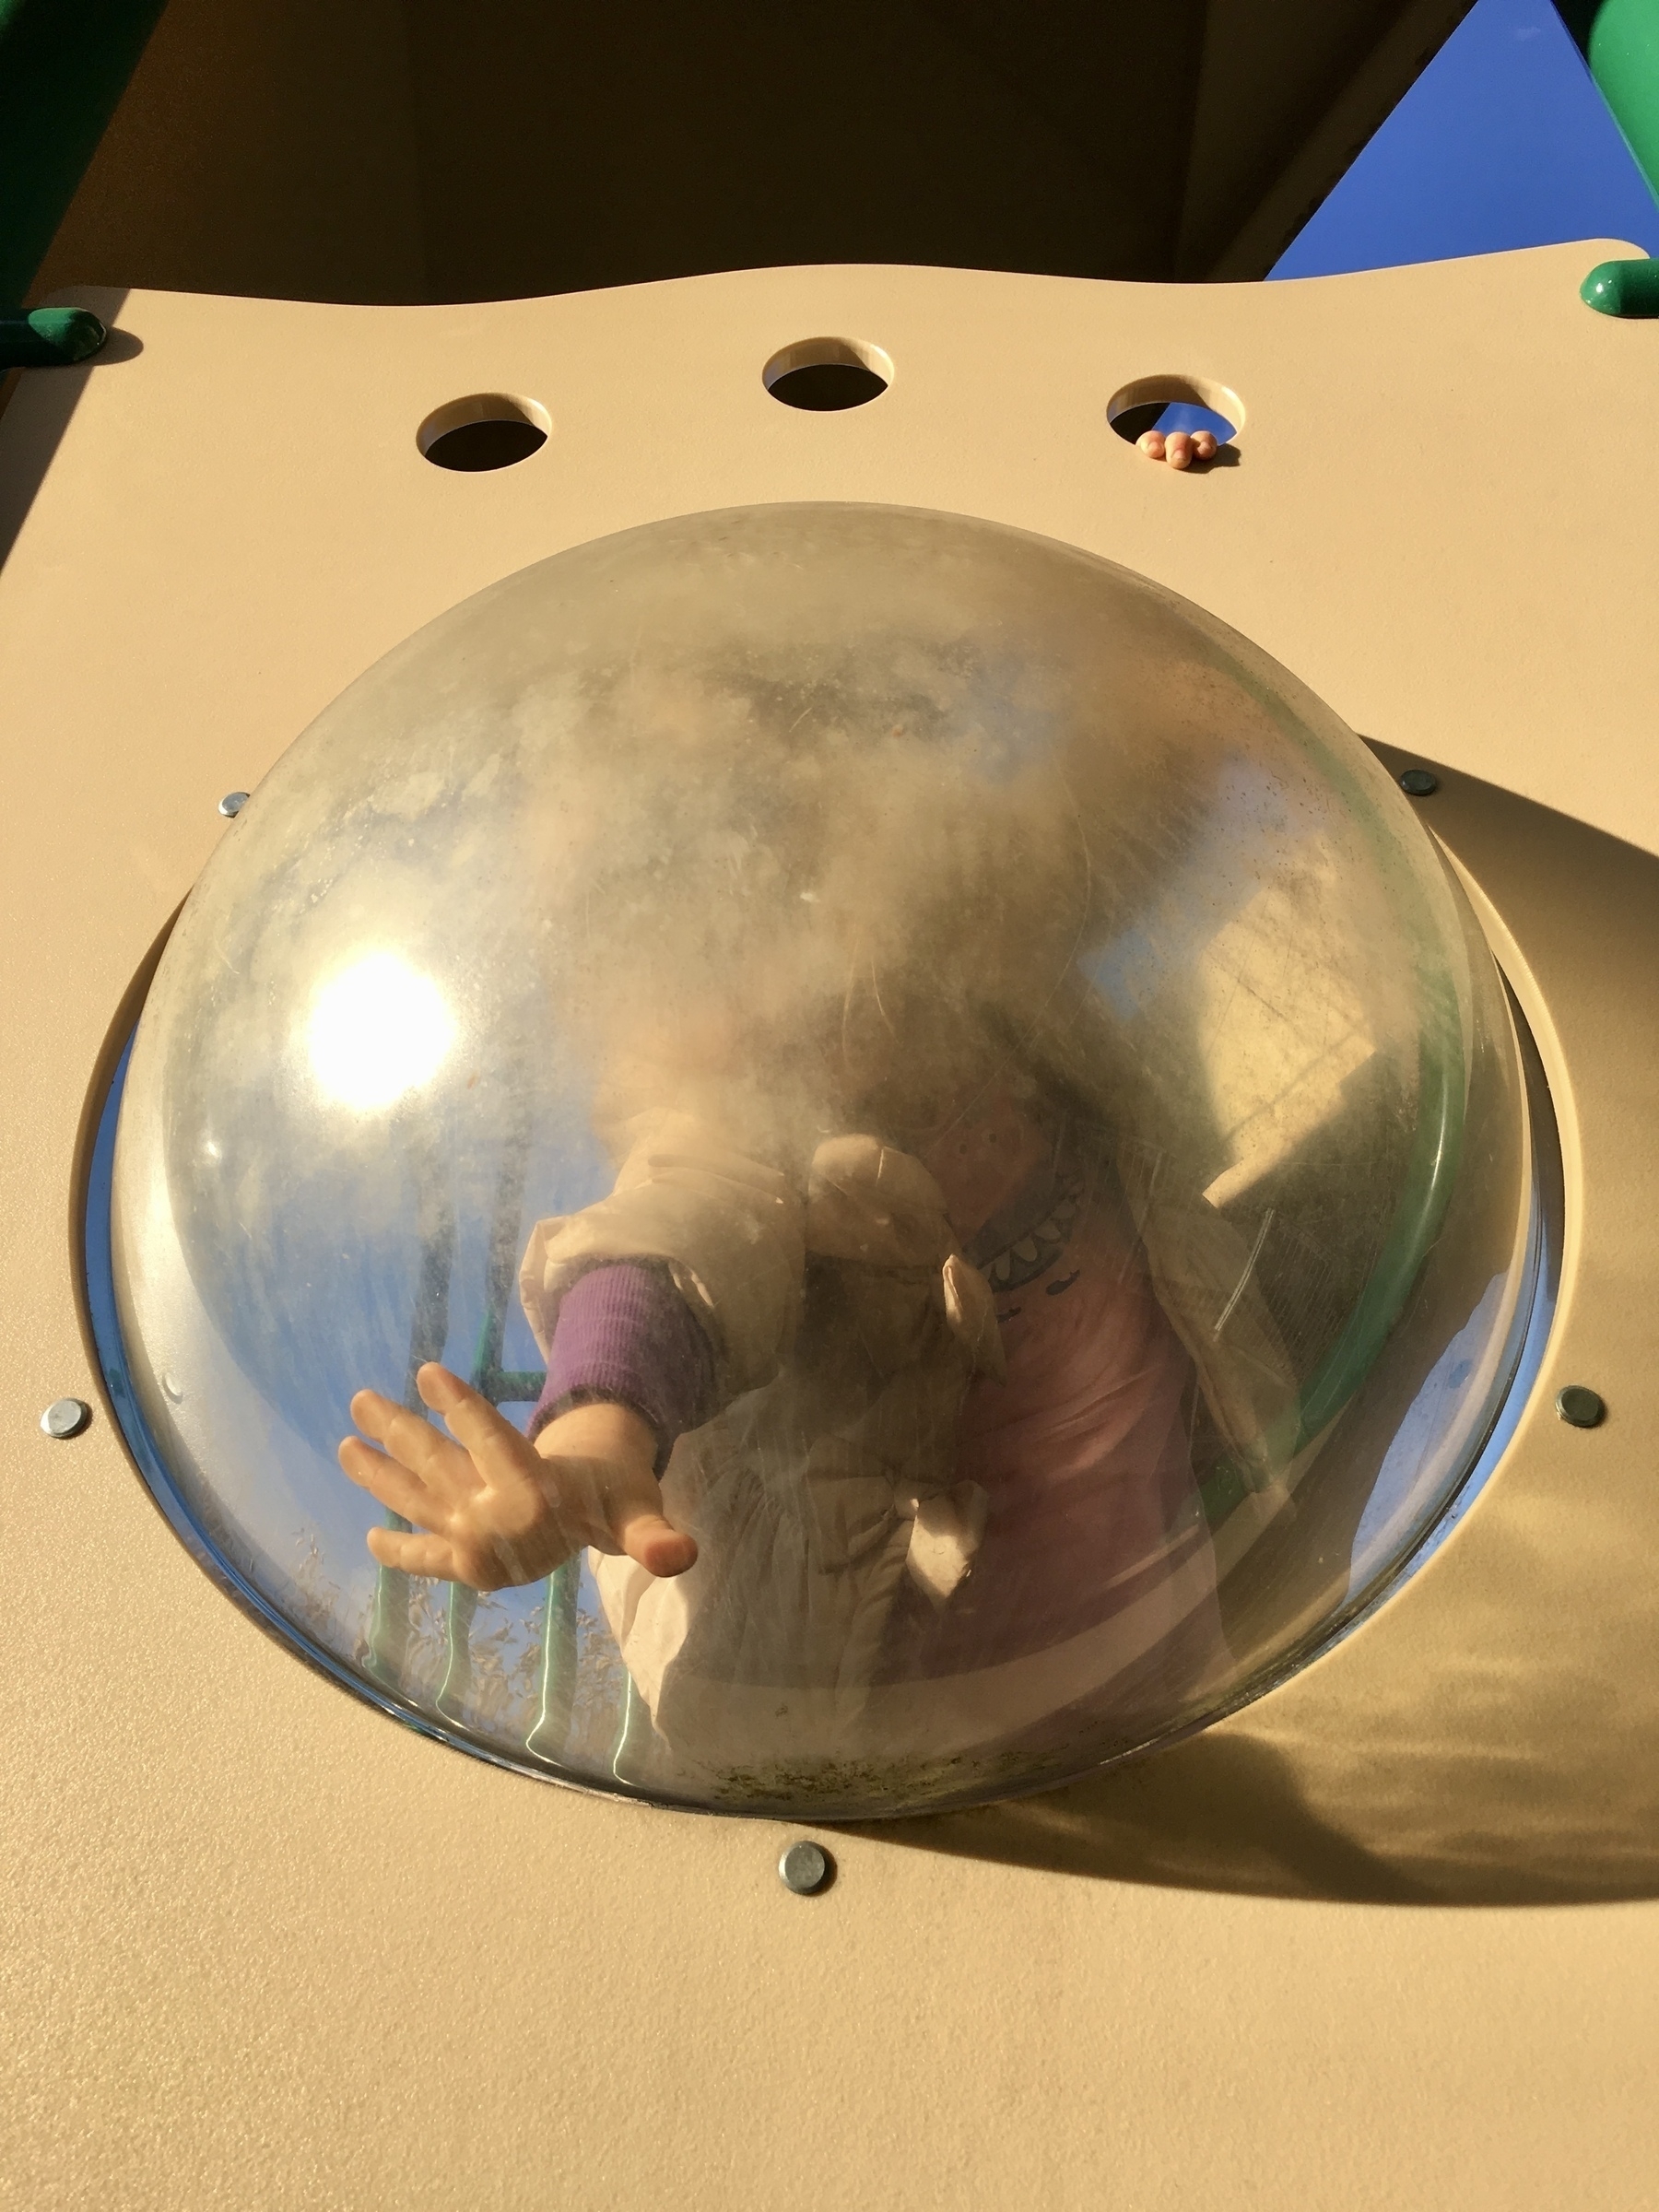 A toddler looking through a large opaque plastic bubble that’s part of a playground play set.